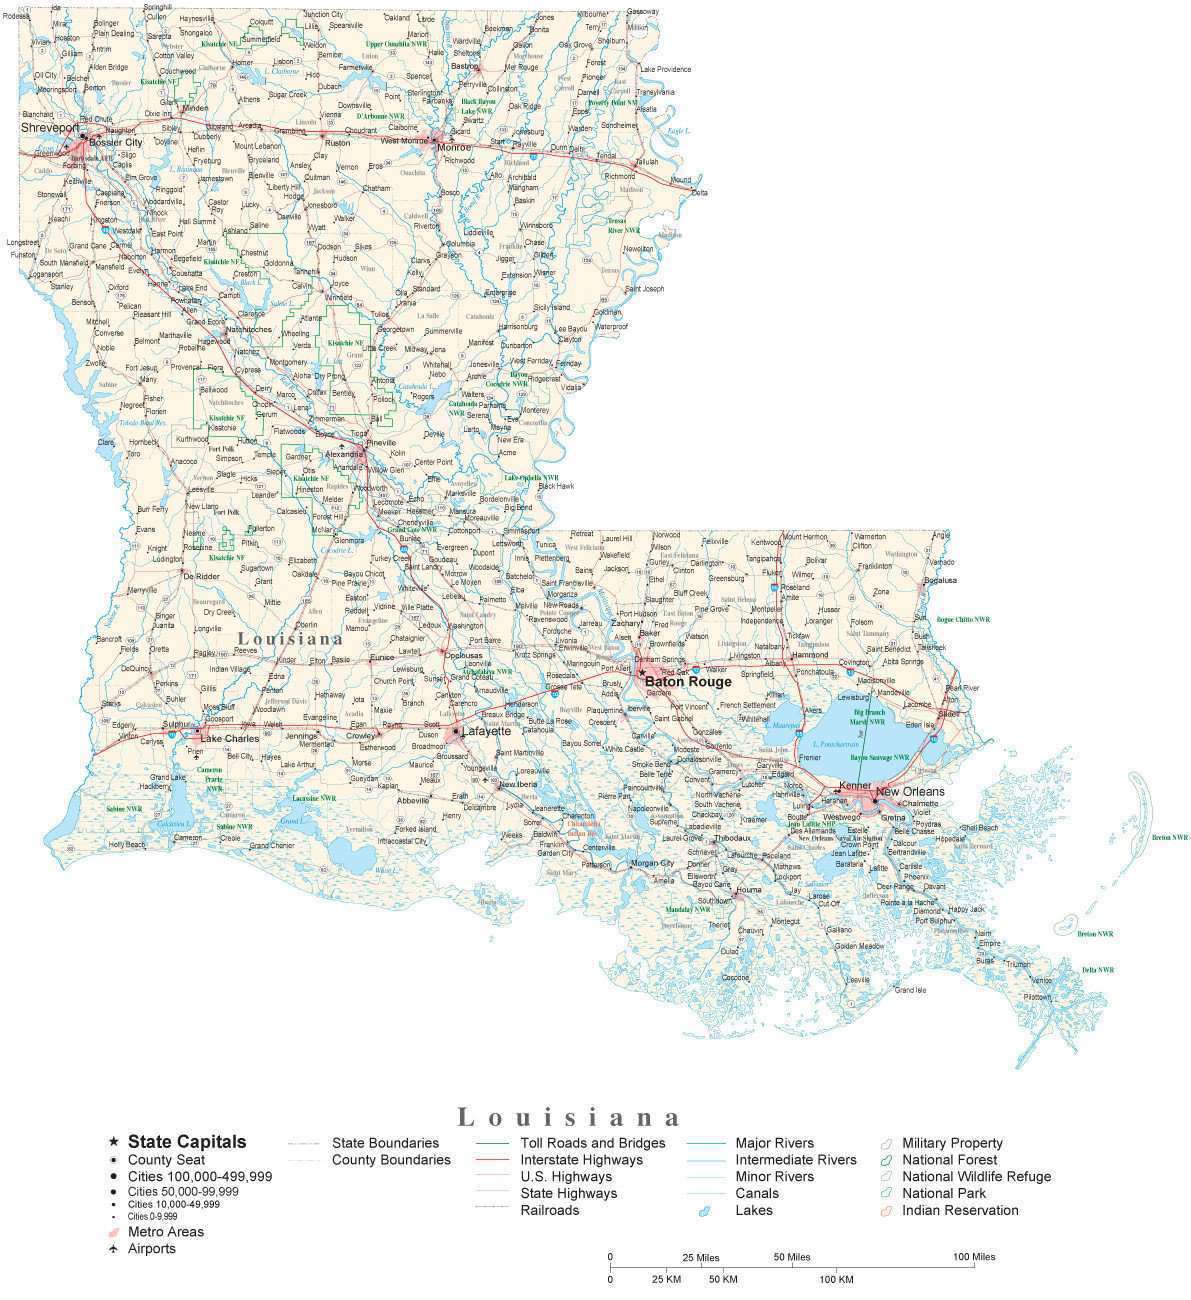 Louisiana Detailed Cut-Out Style map in Adobe Illustrator vector format from Map Resources ...